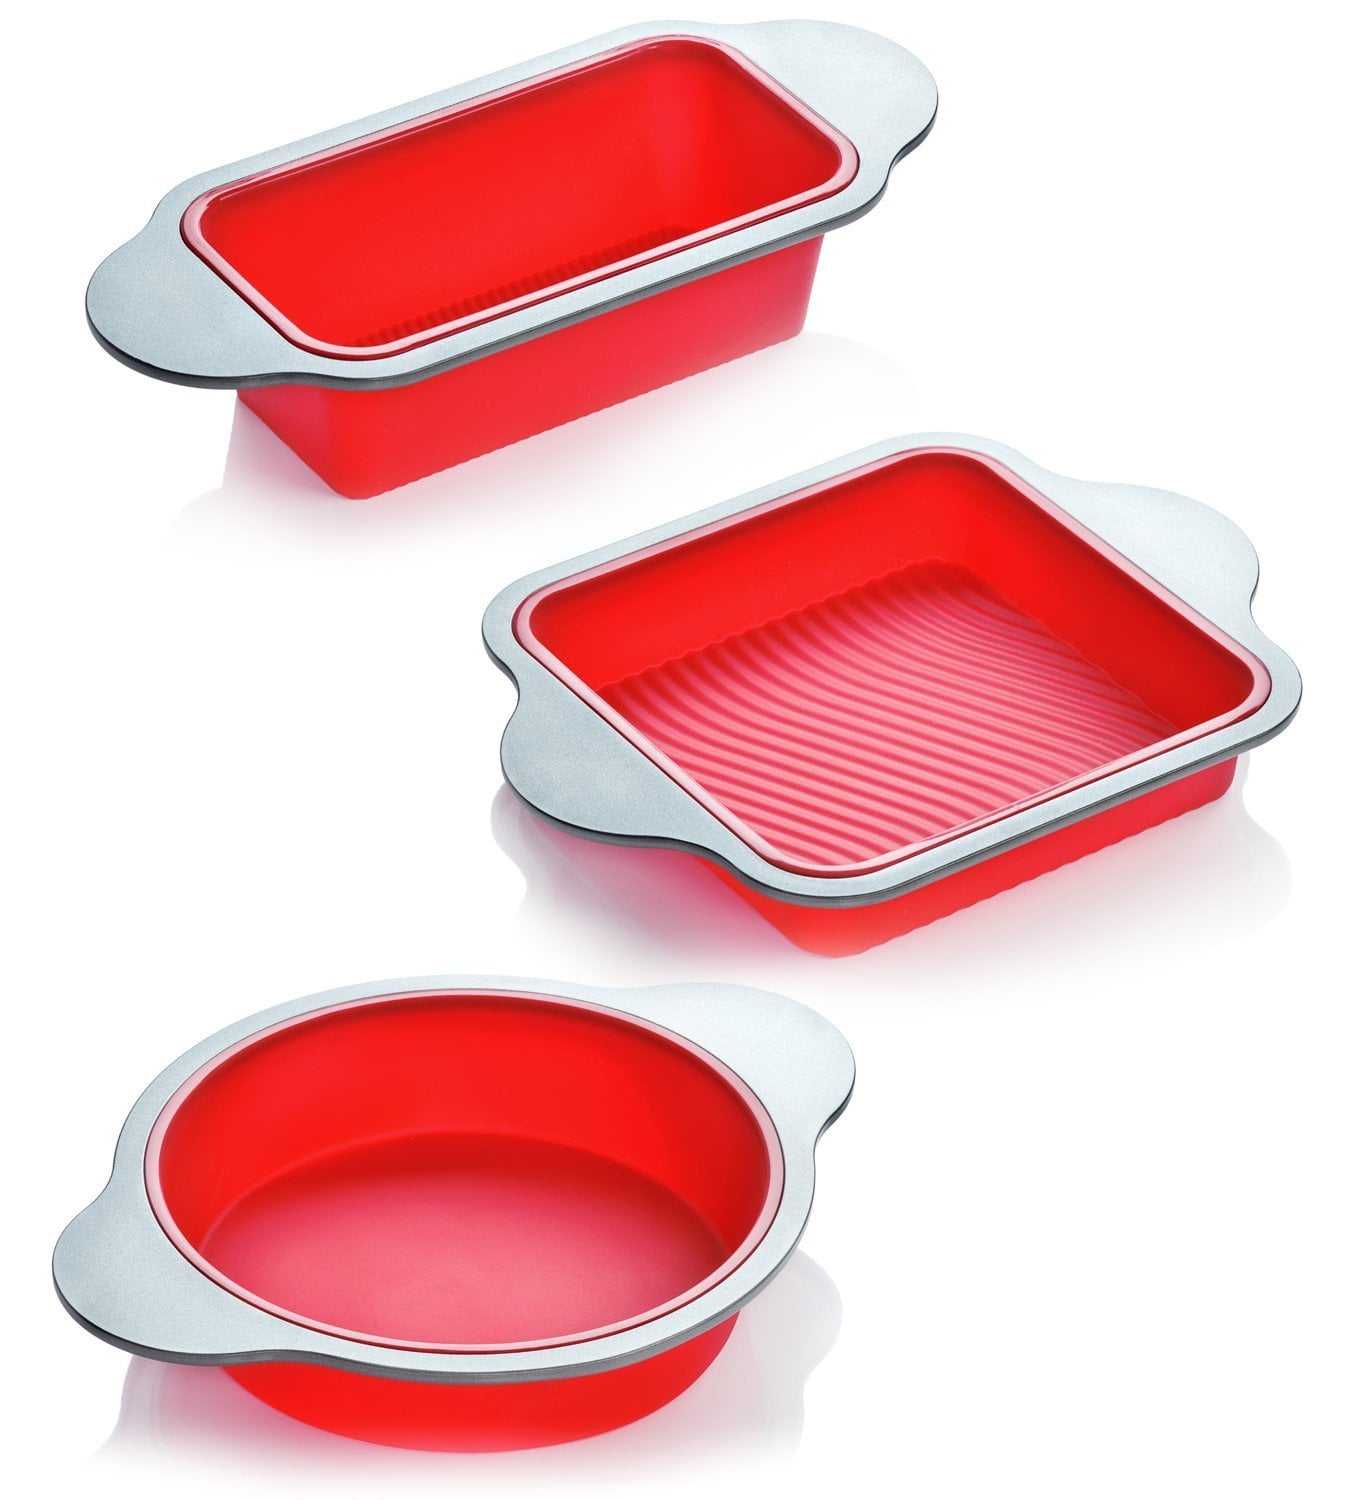 Quality 5.7" Silicone Cake Pan Oven Safe Non-Stick Baking Mould Bakeware Tray 